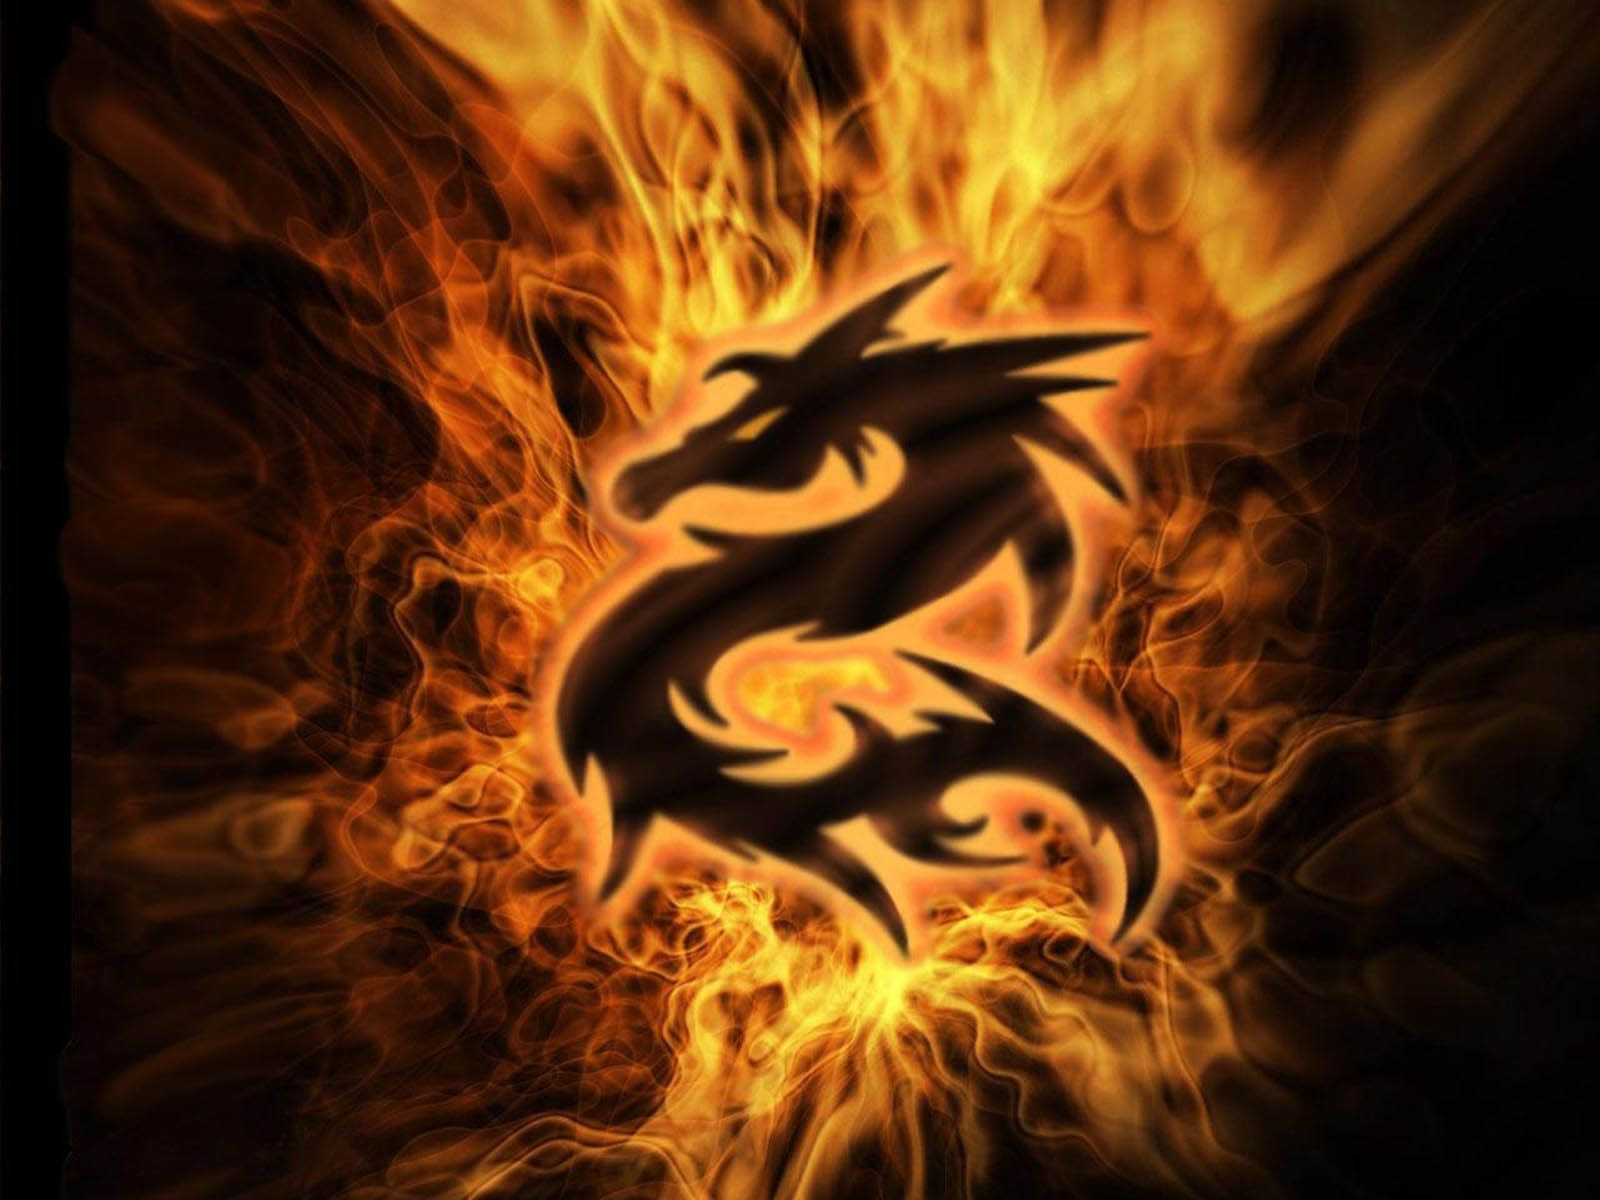 Coolest Dragon Symbol With Flames Wallpaper